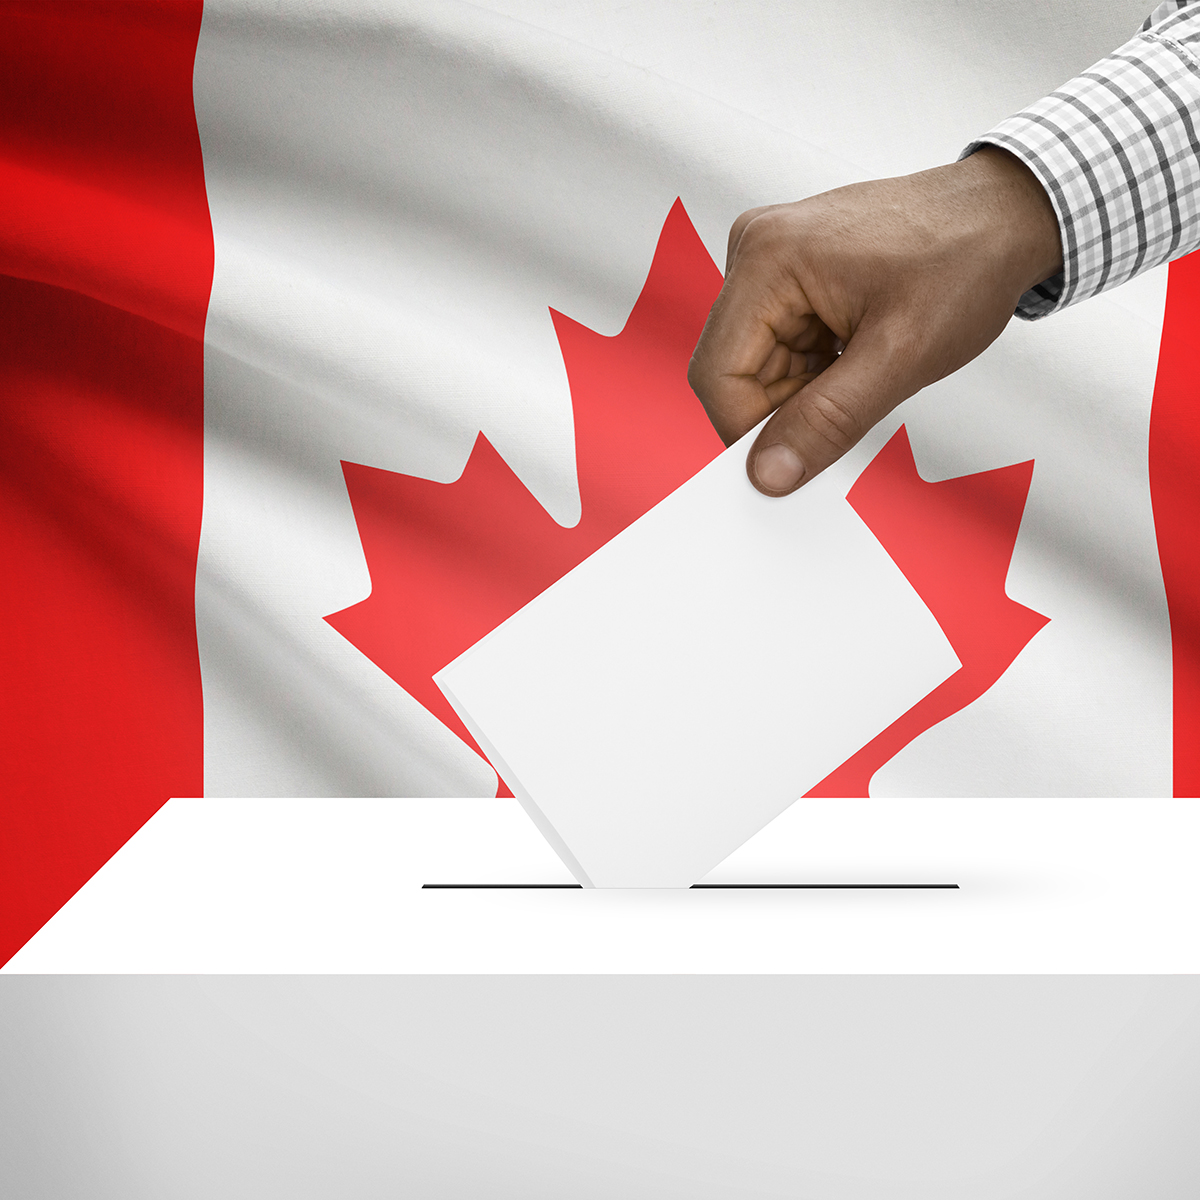 A hand holding a voting card and dropping it in a ballot box, with the Canada flag in background.